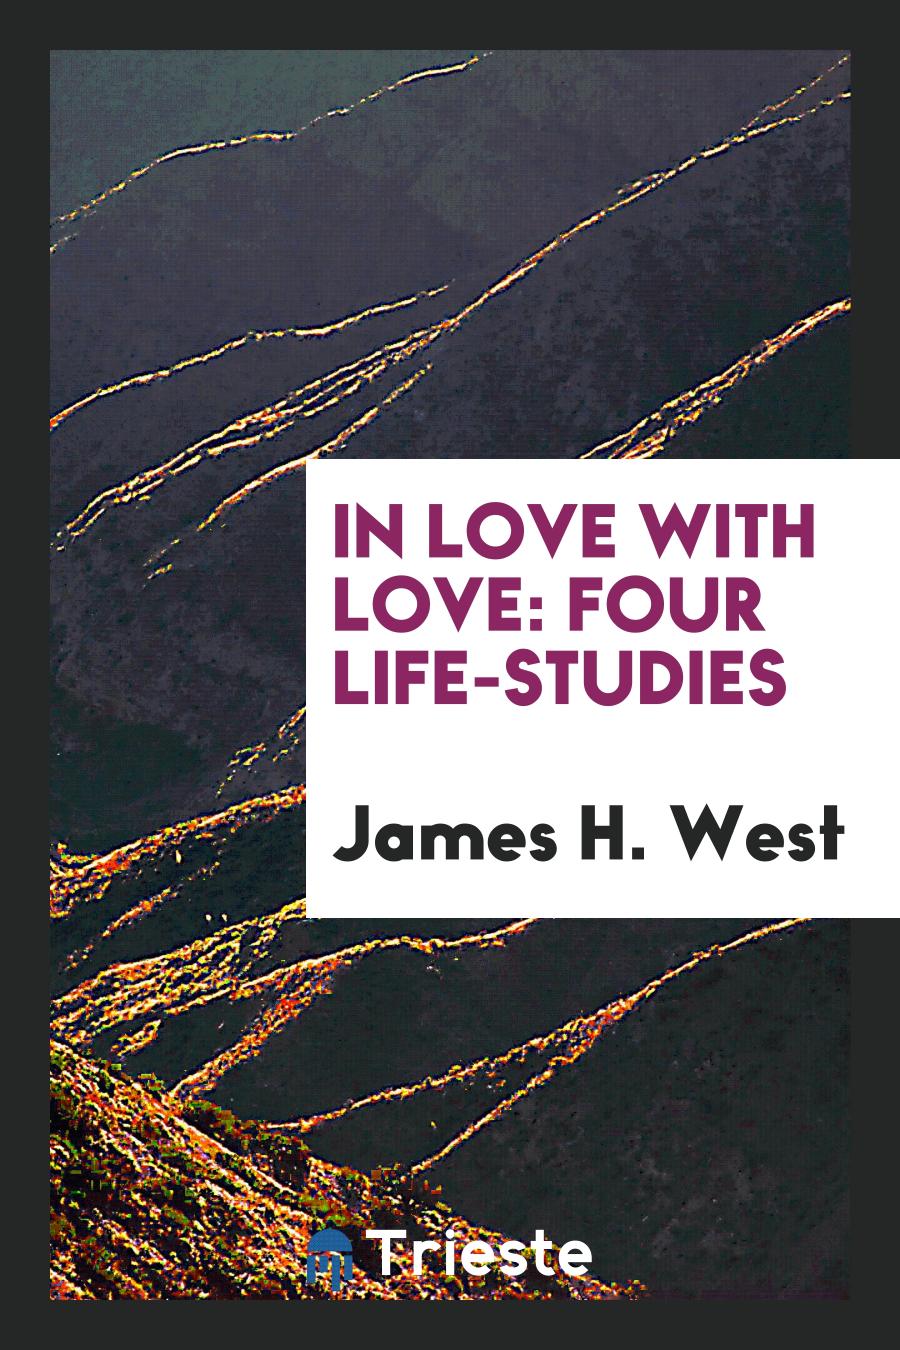 In Love with Love: Four Life-Studies